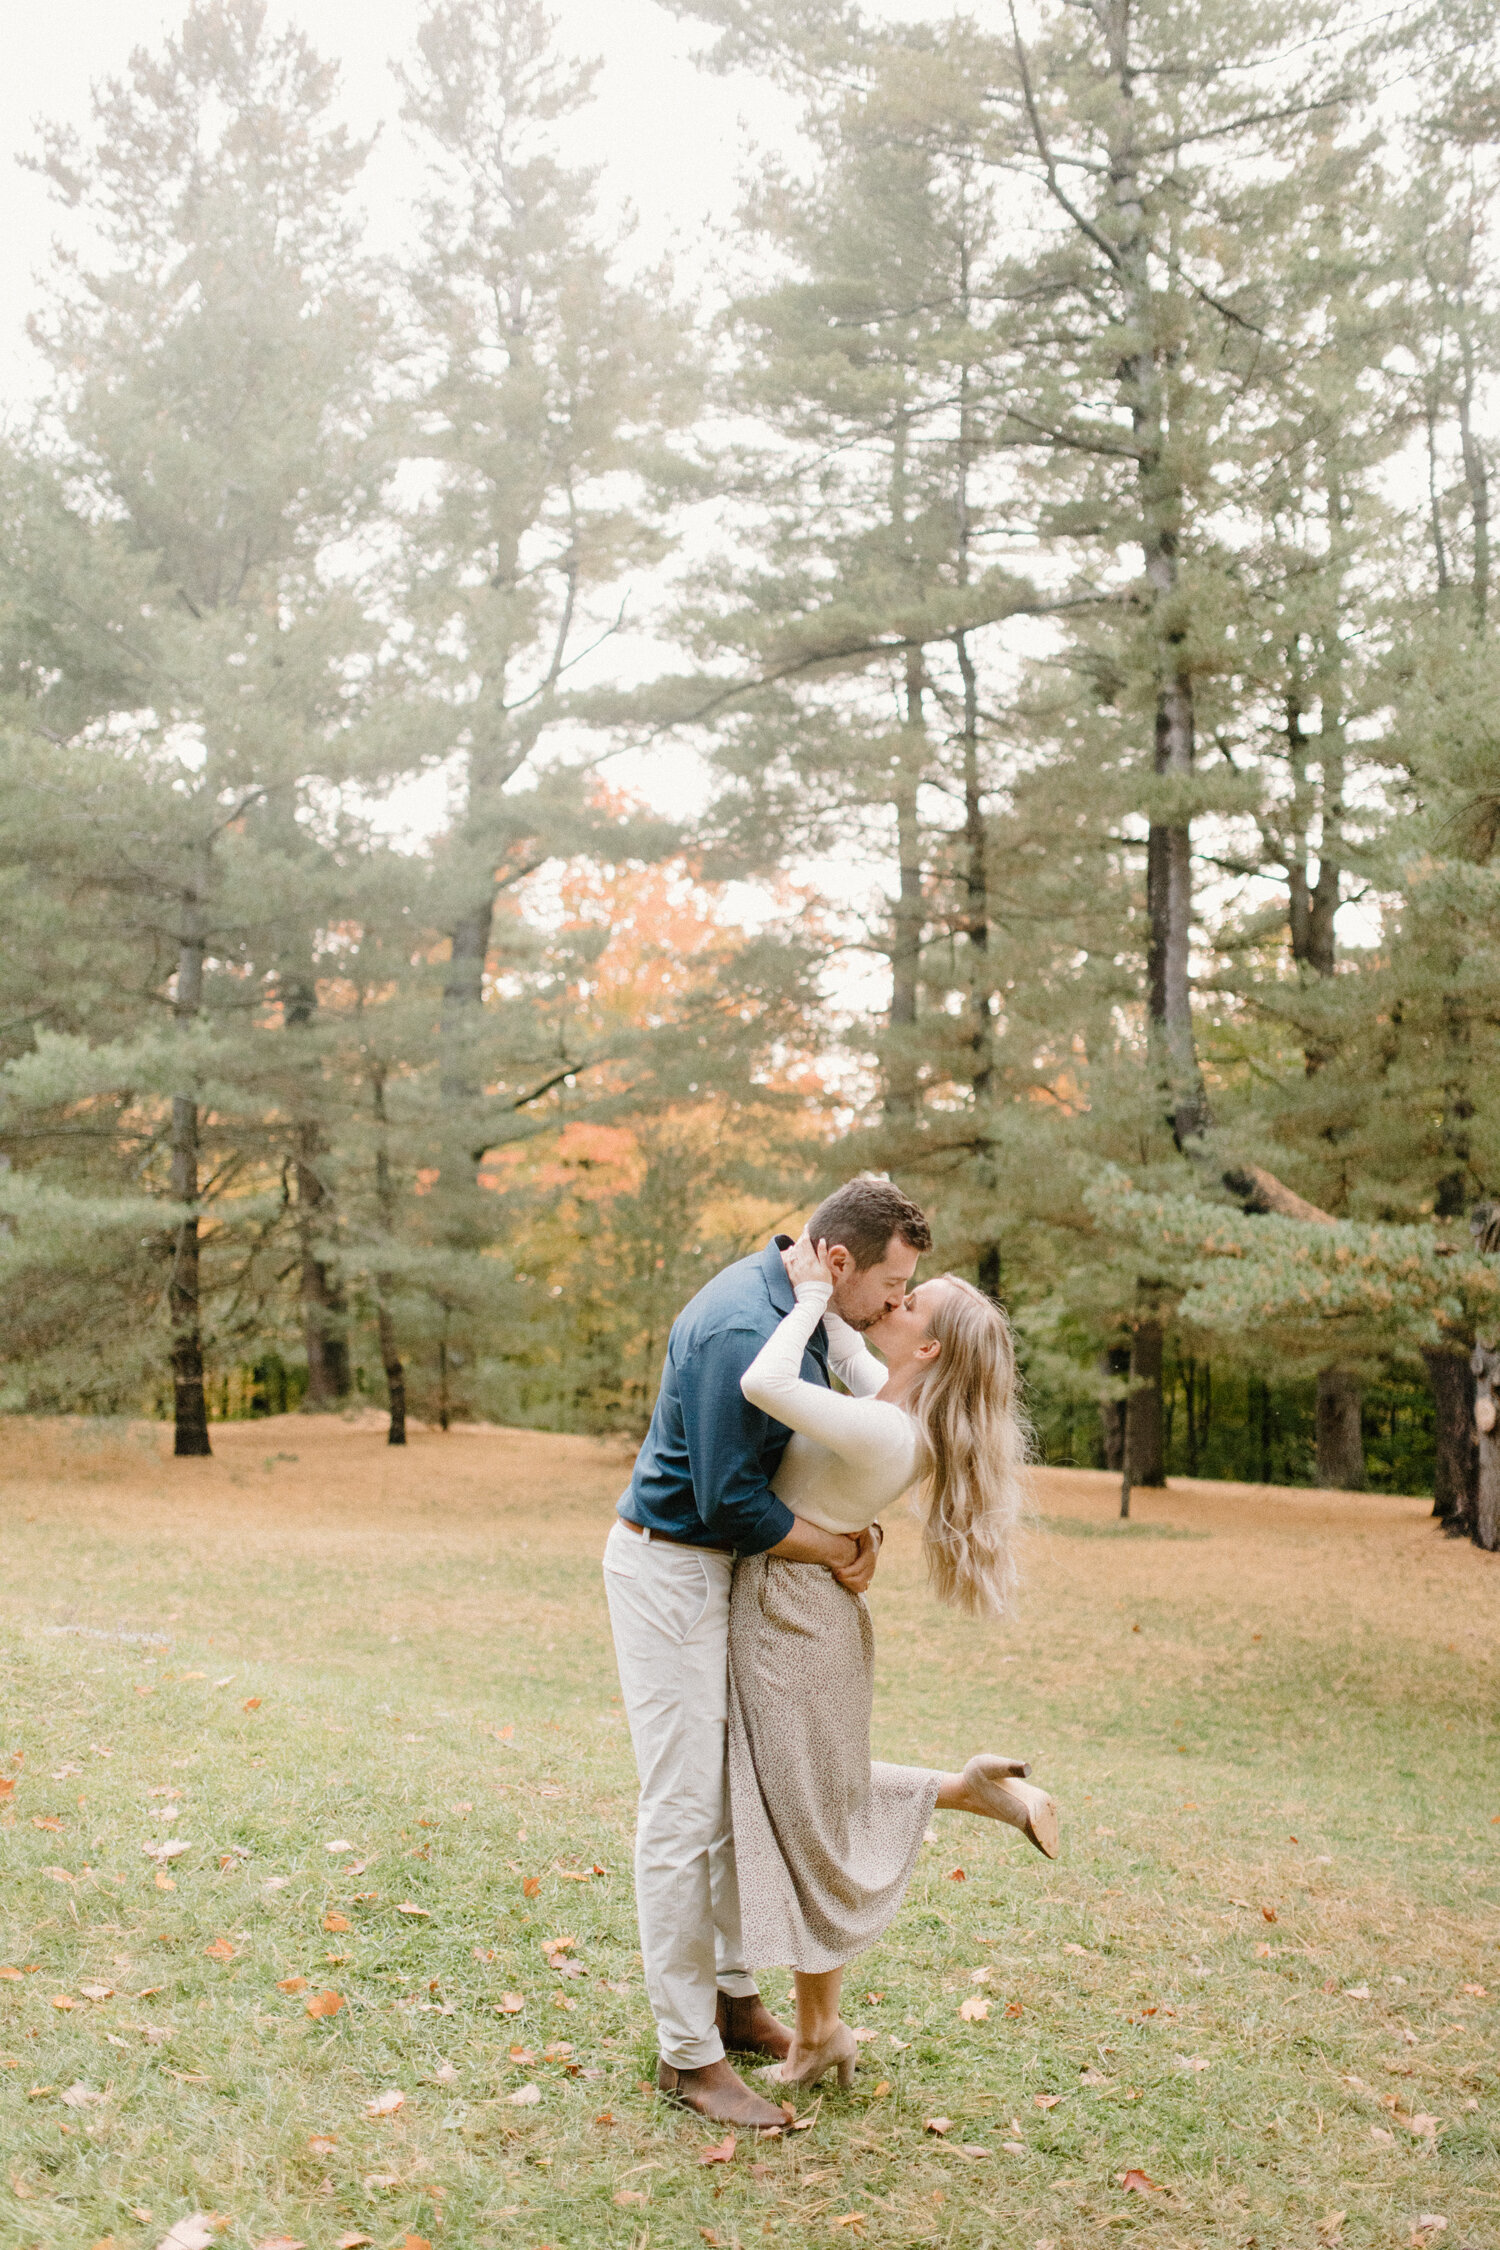  With autumn leaves falling in the backdrop, Chelsea Mason Photography captures a romantic, dramatic kiss between this couple during their engagement session in Quebec, Canada. passionate dramatic kissing, neutral engagement outfits, long loose curle